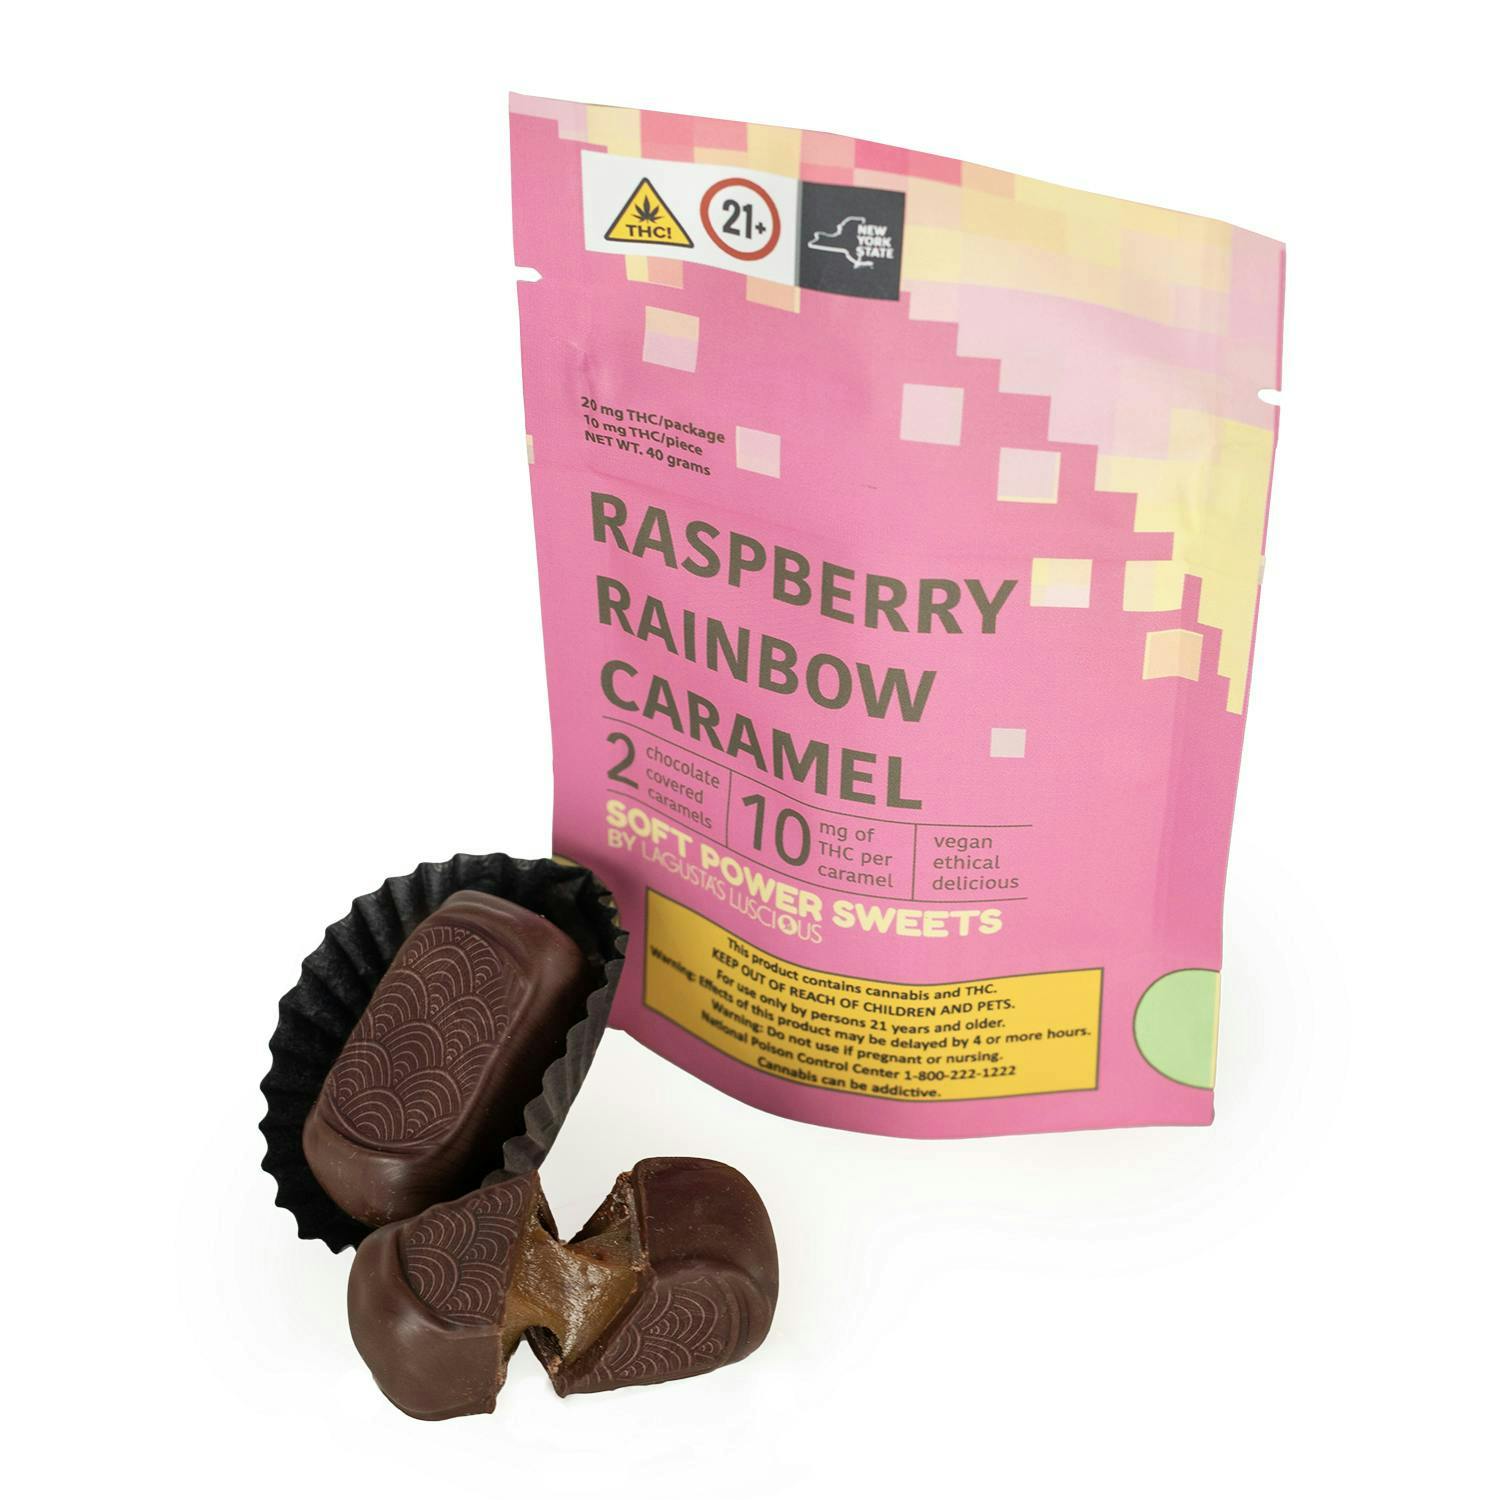 Raspberry Rainbow Caramel Chocolates • 2 Pack - Soft Power Sweets - EDIBLES - Rockland County Weed Delivery | Treehouse Cannabis